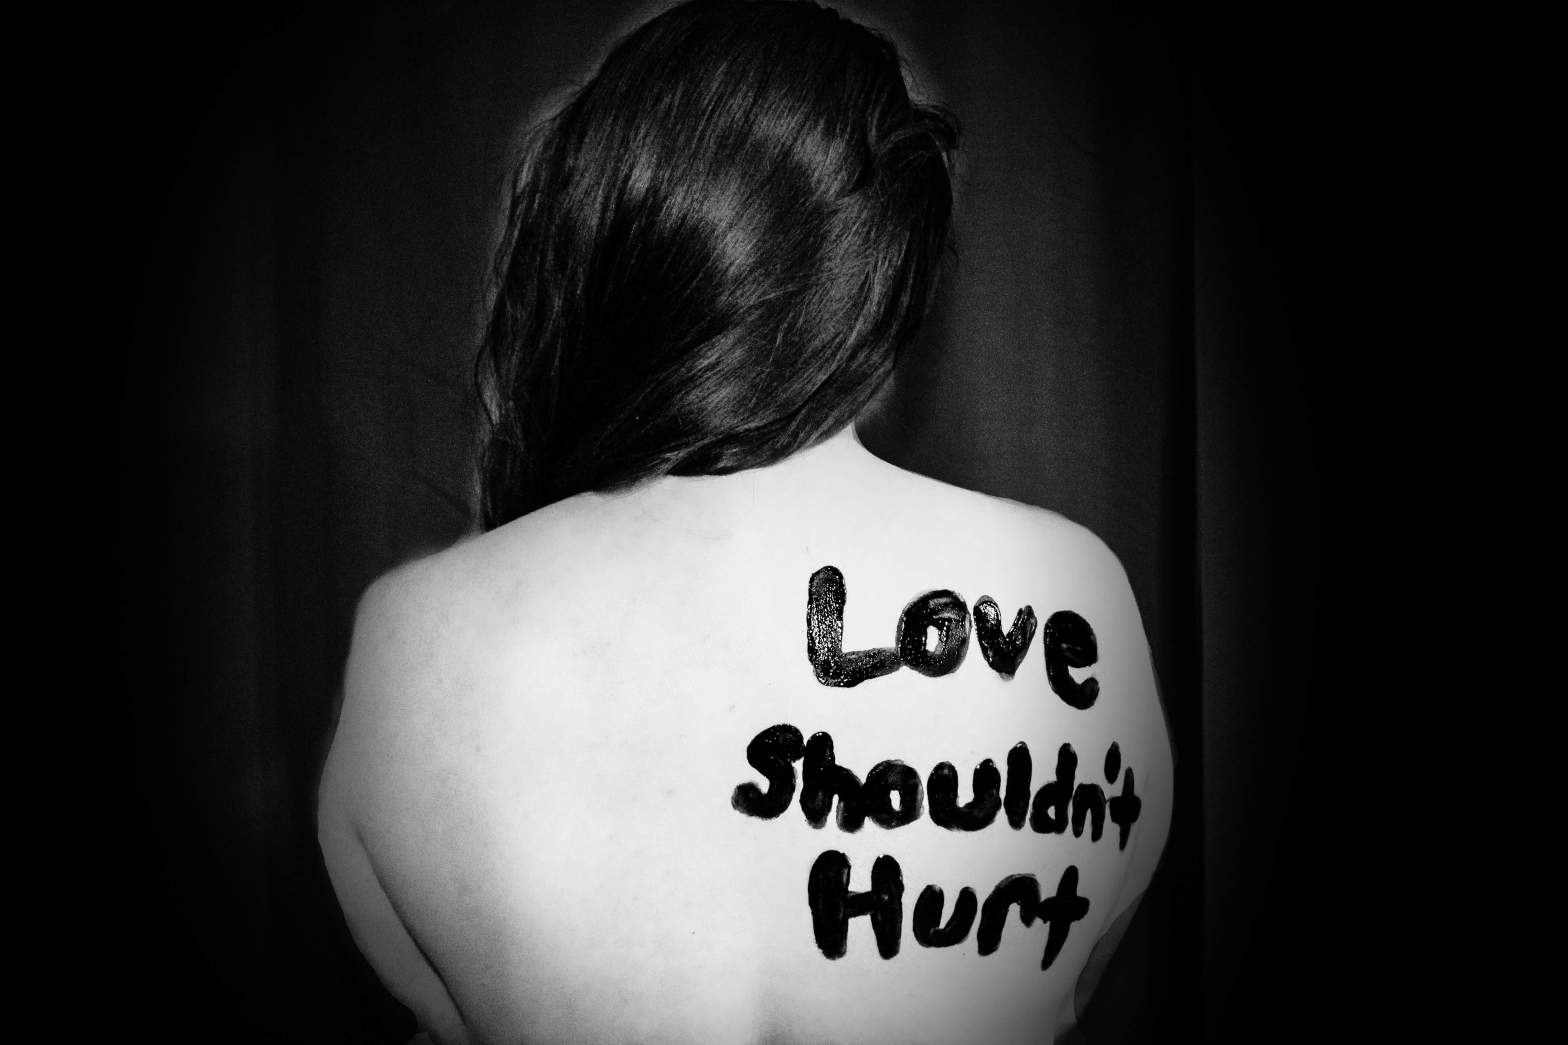 black and white photo of a woman's bare back with the words 'love shouldn't hurt' written on the shoulder